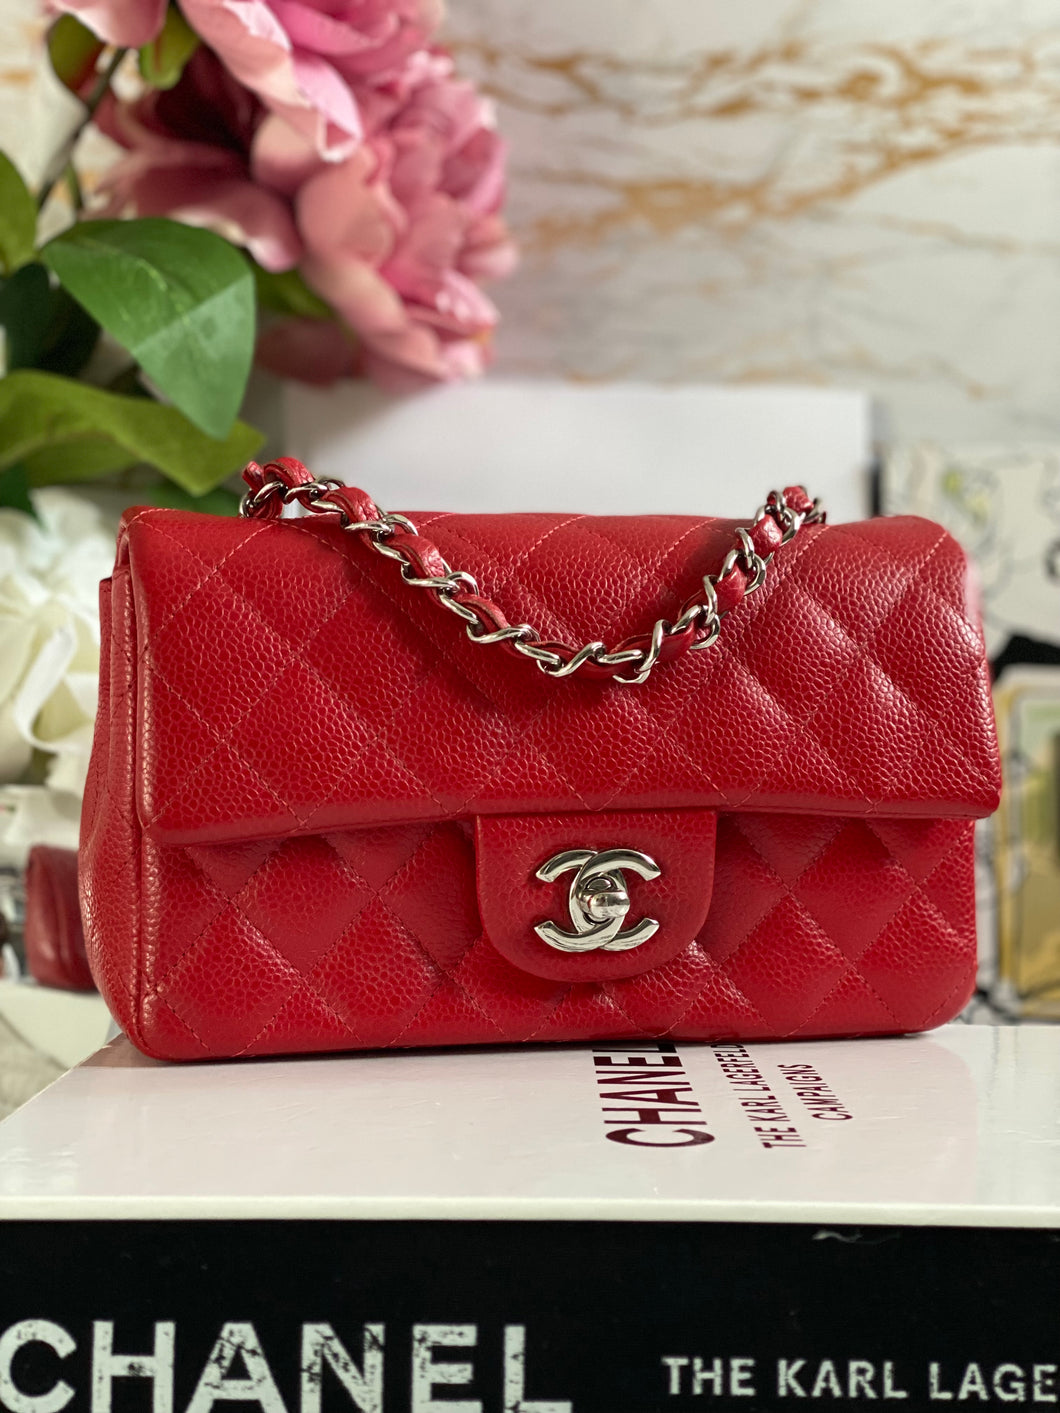 Chanel 14C 2013/2014 cruise collection series 18 Red caviar SHW Mini Rectangular Flap Bag